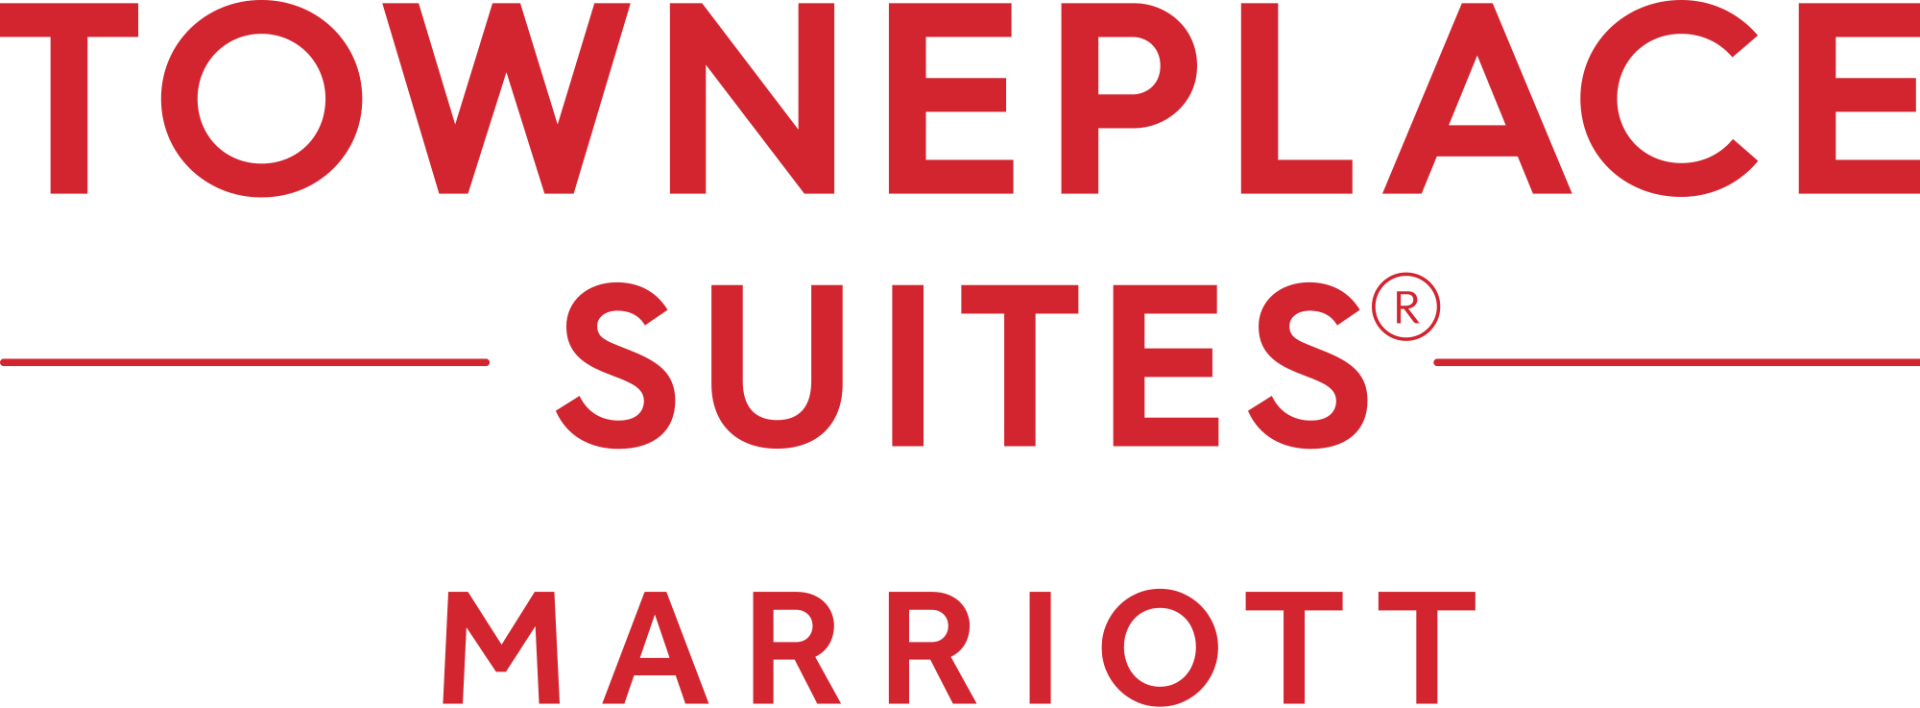 TownePlace Suites by Marriott logo